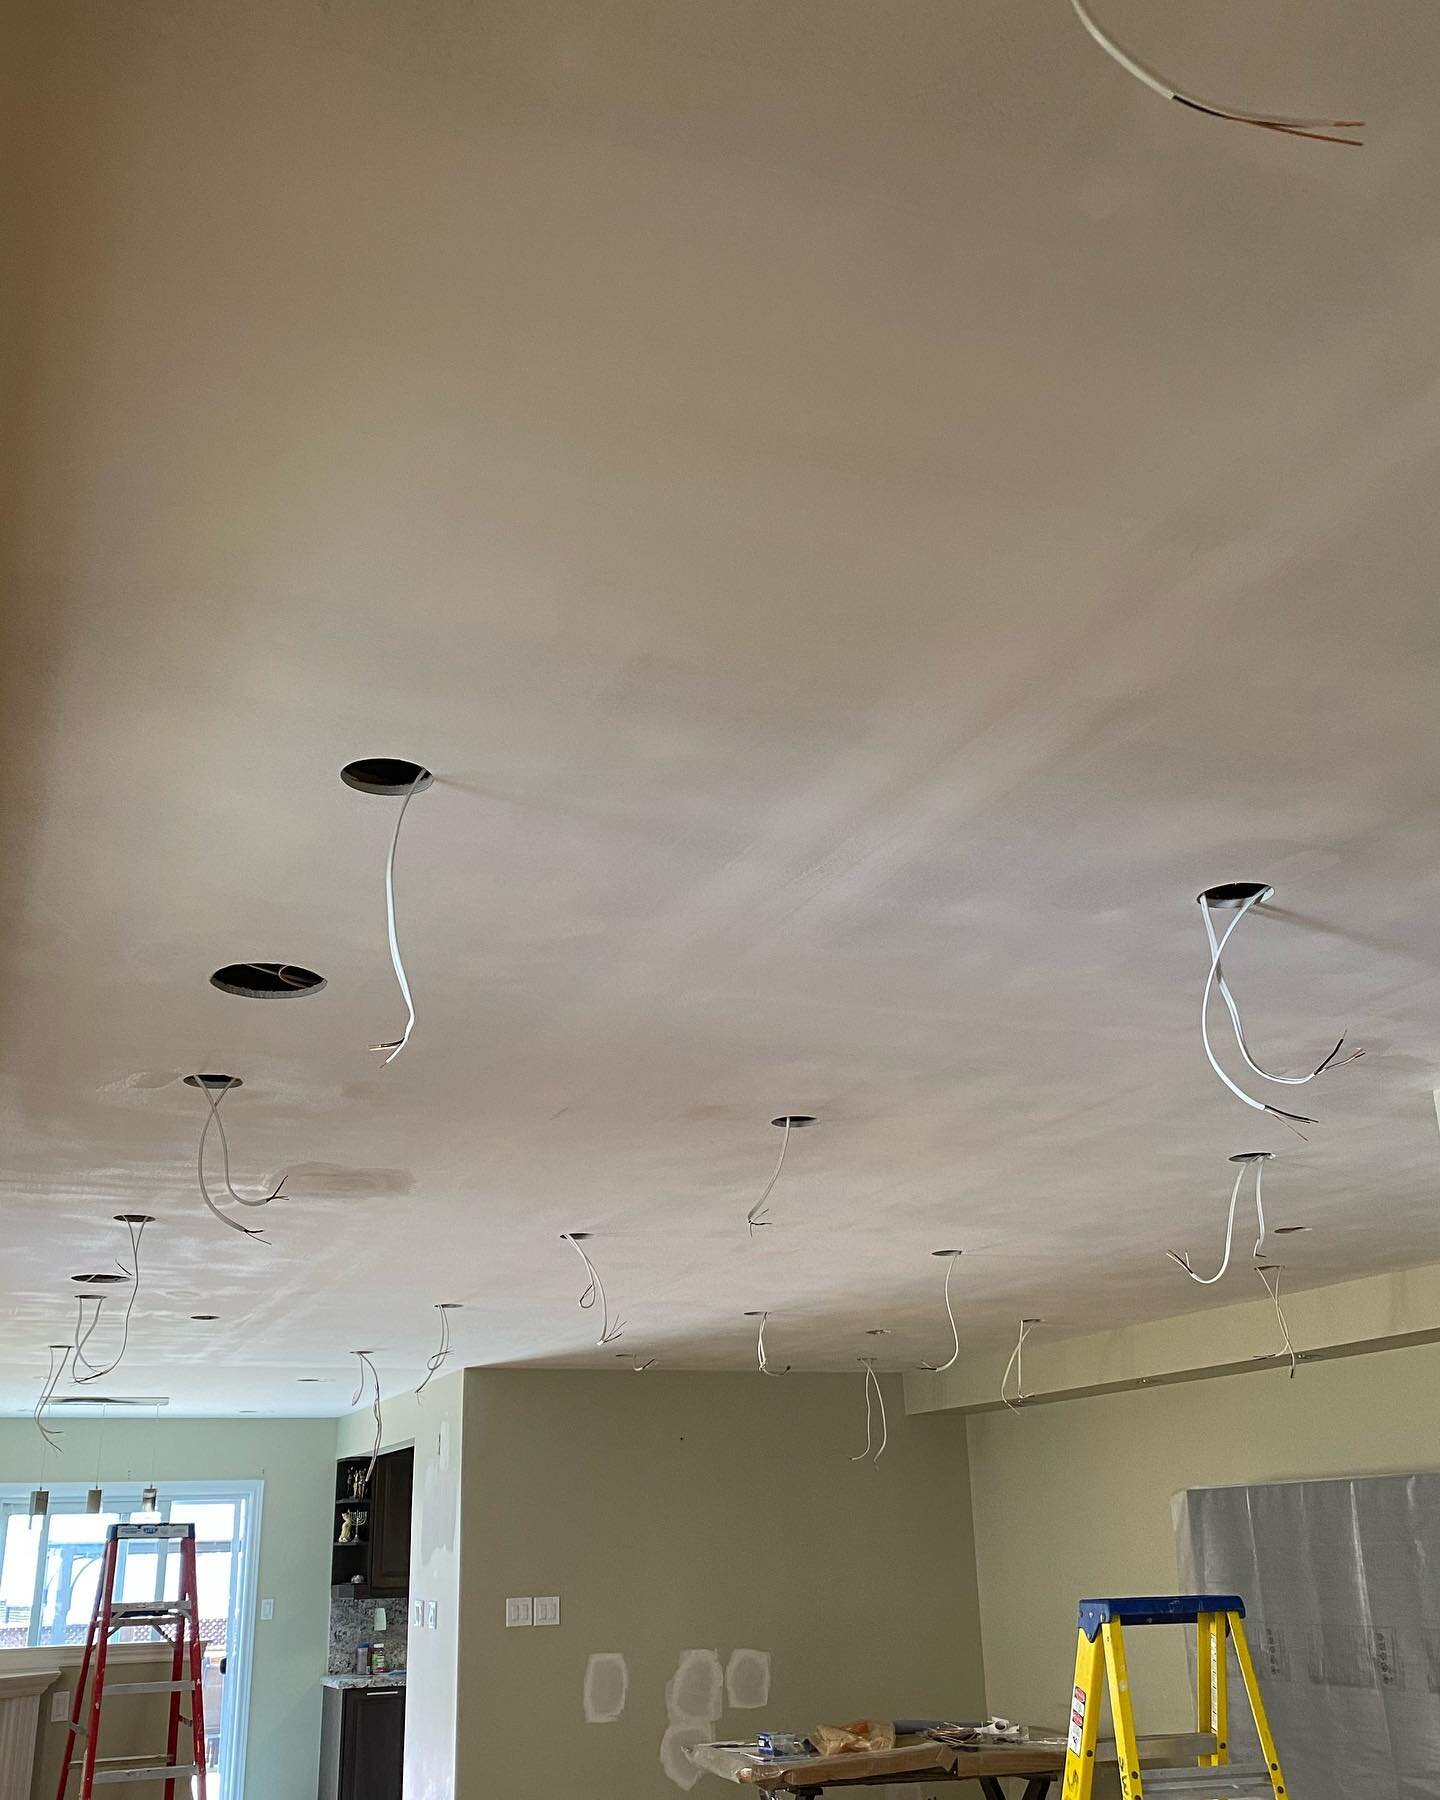 Gettin ready for round 2, pot lights💡
⚡️Are you interested in professionally done pot lights for your home or business? ☎️ Call or text (289)-315-1944 for a free quote 📲
&bull;
&bull;
&bull;
&bull;
#electrician #electrical #wiring #trades #light #l